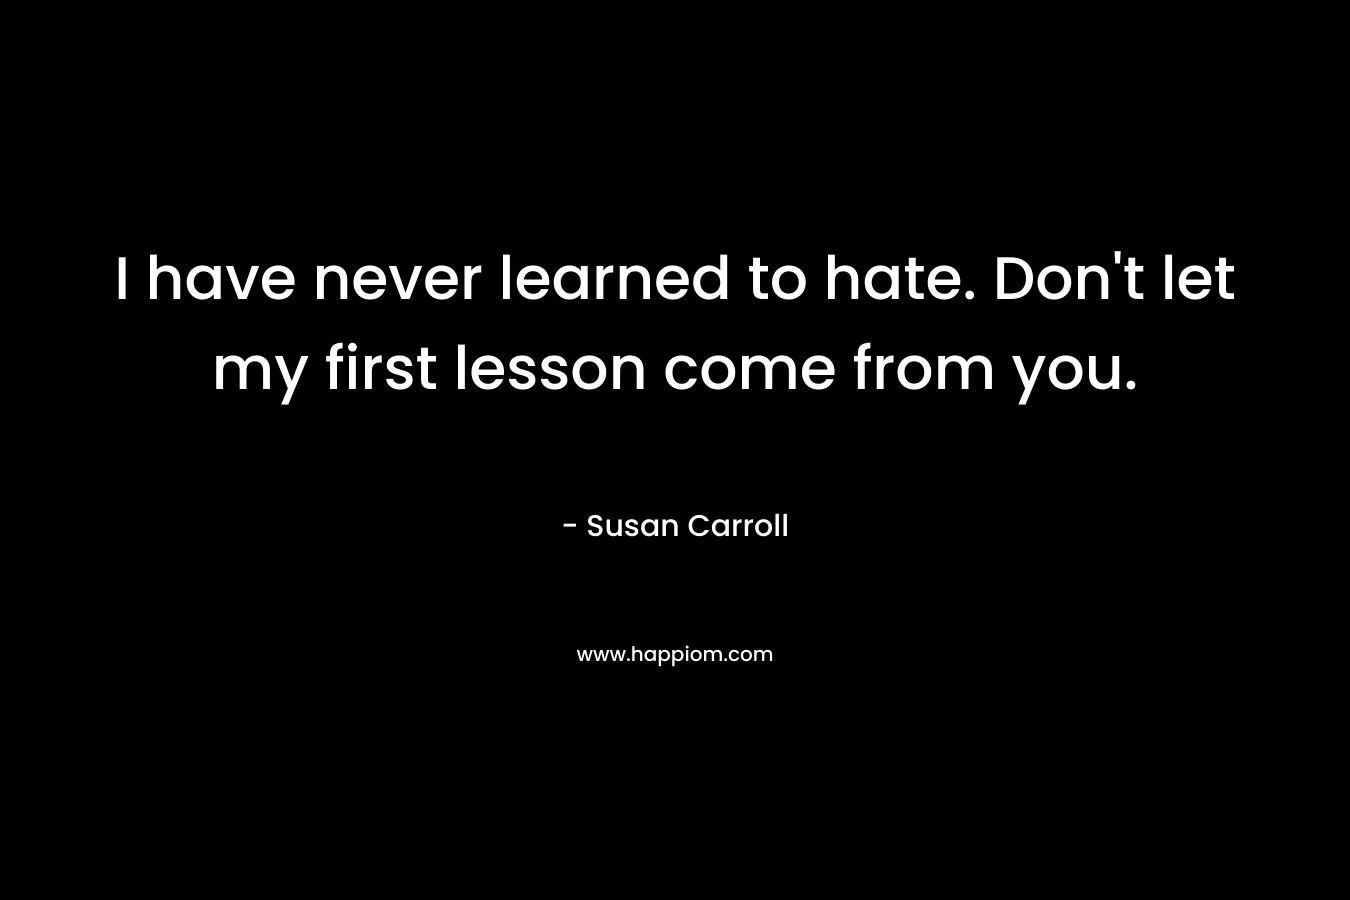 I have never learned to hate. Don't let my first lesson come from you.